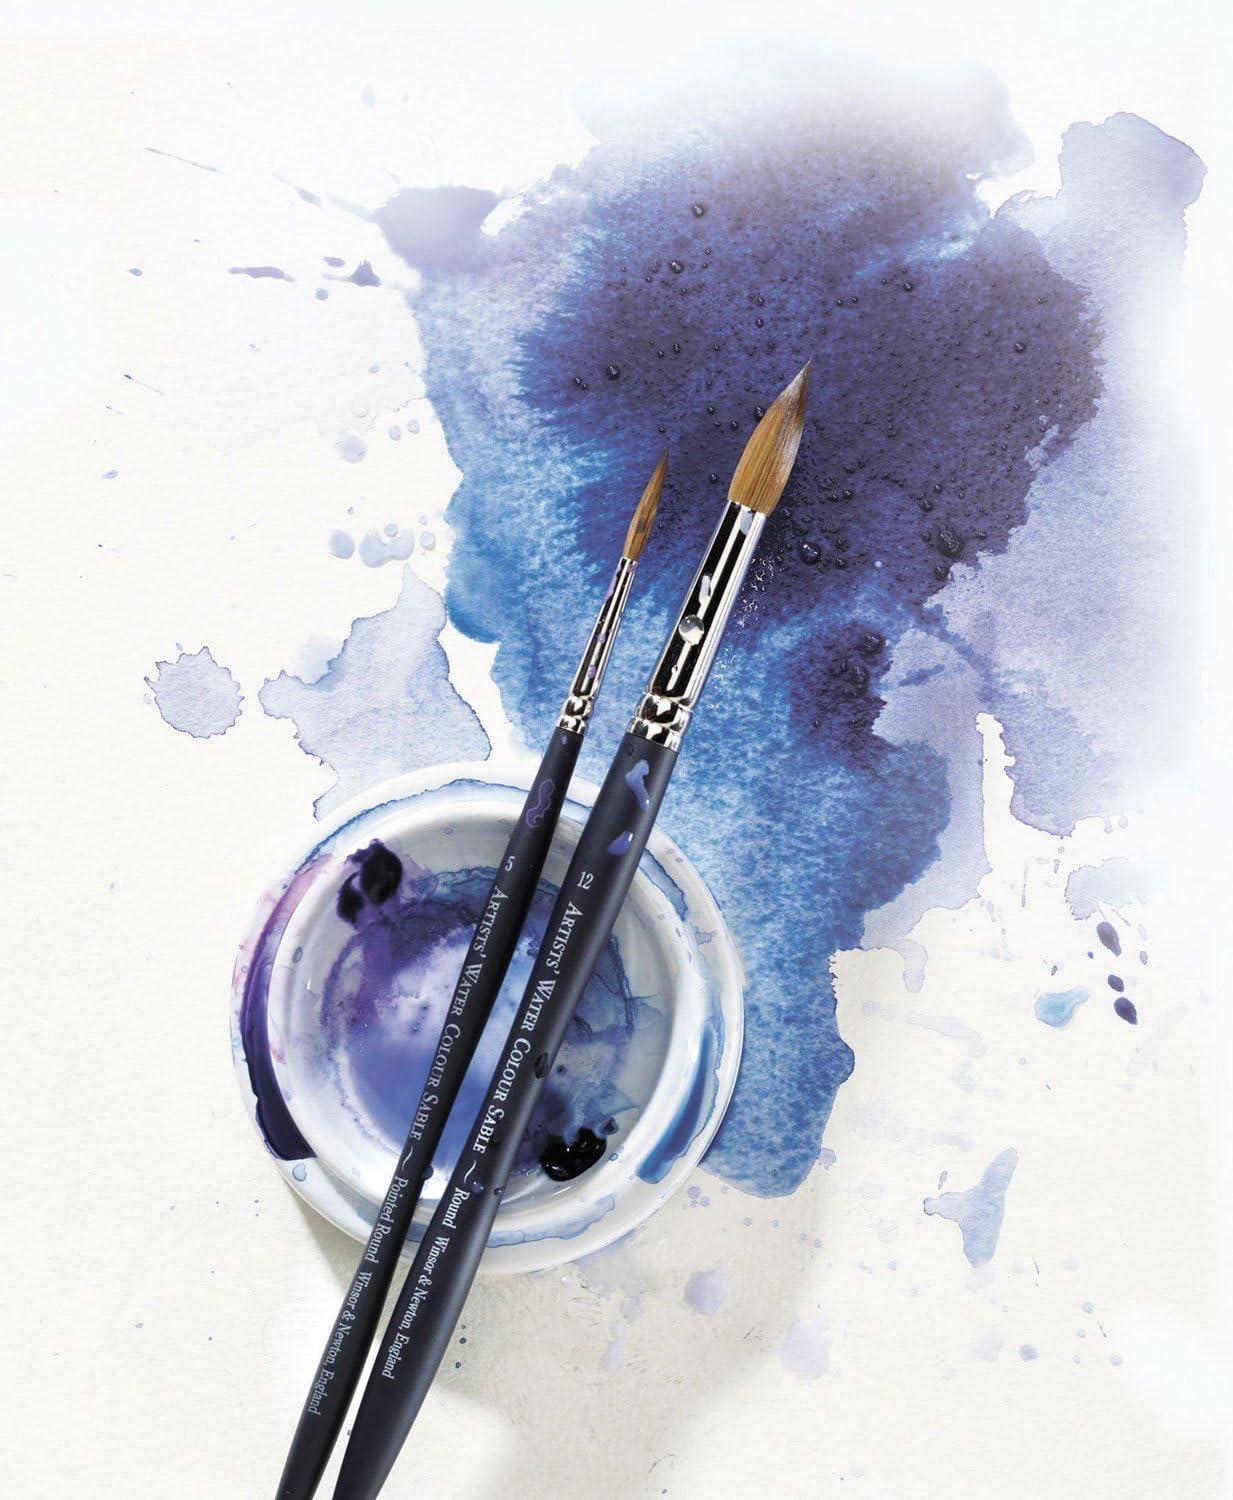 Winsor & Newton Professional Watercolor Sable Brush-Round #3, 3